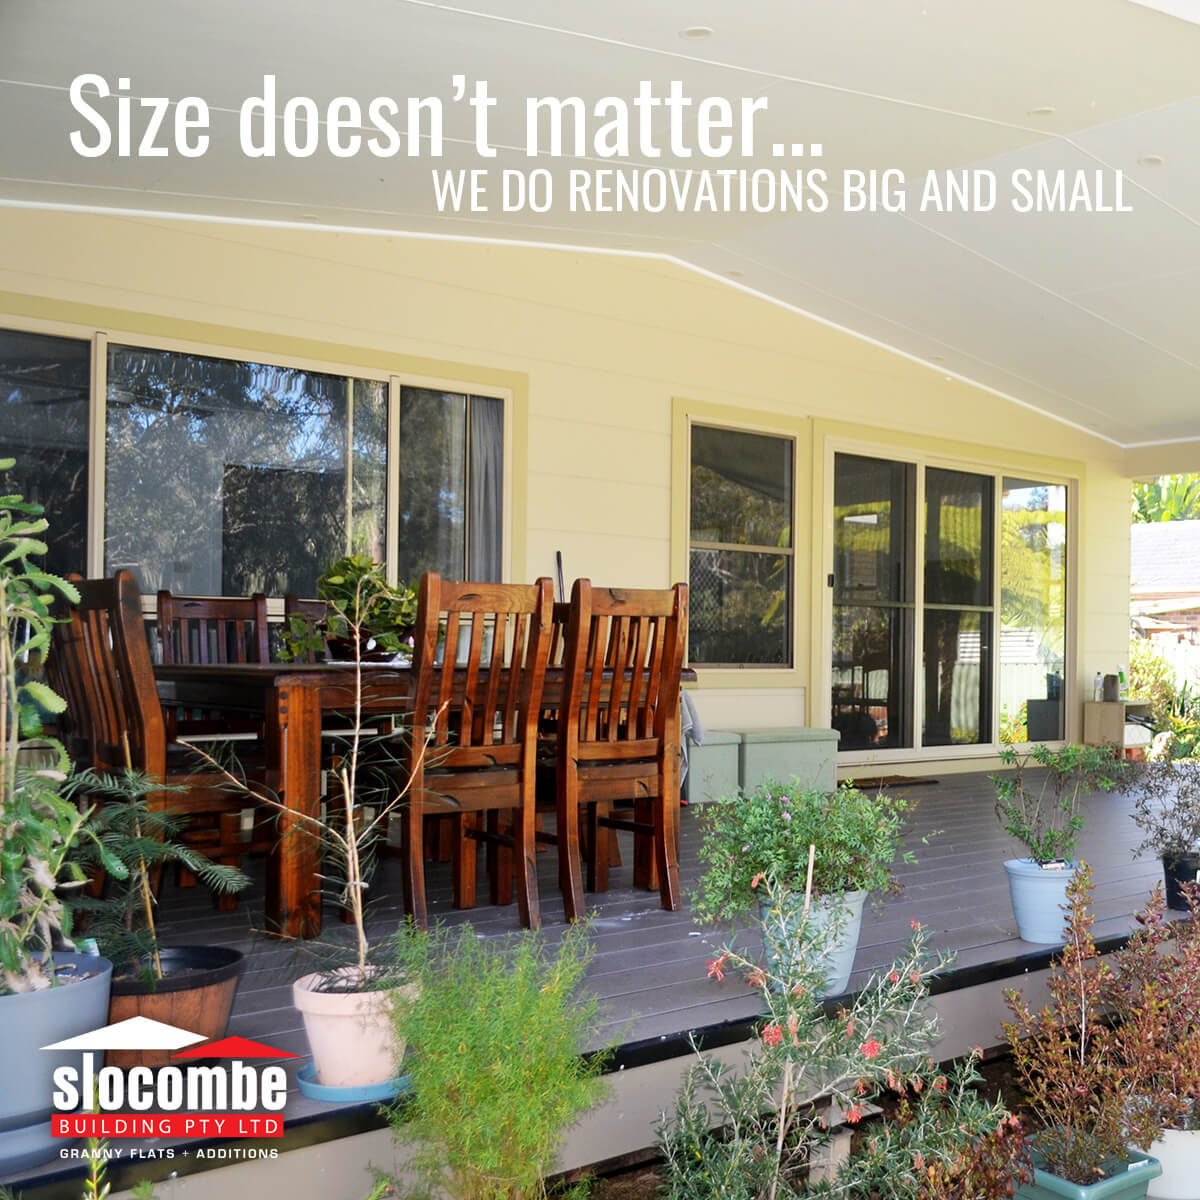 Slocombe Building Pty Ltd - Size doesn't matter...we do renovations big and small!